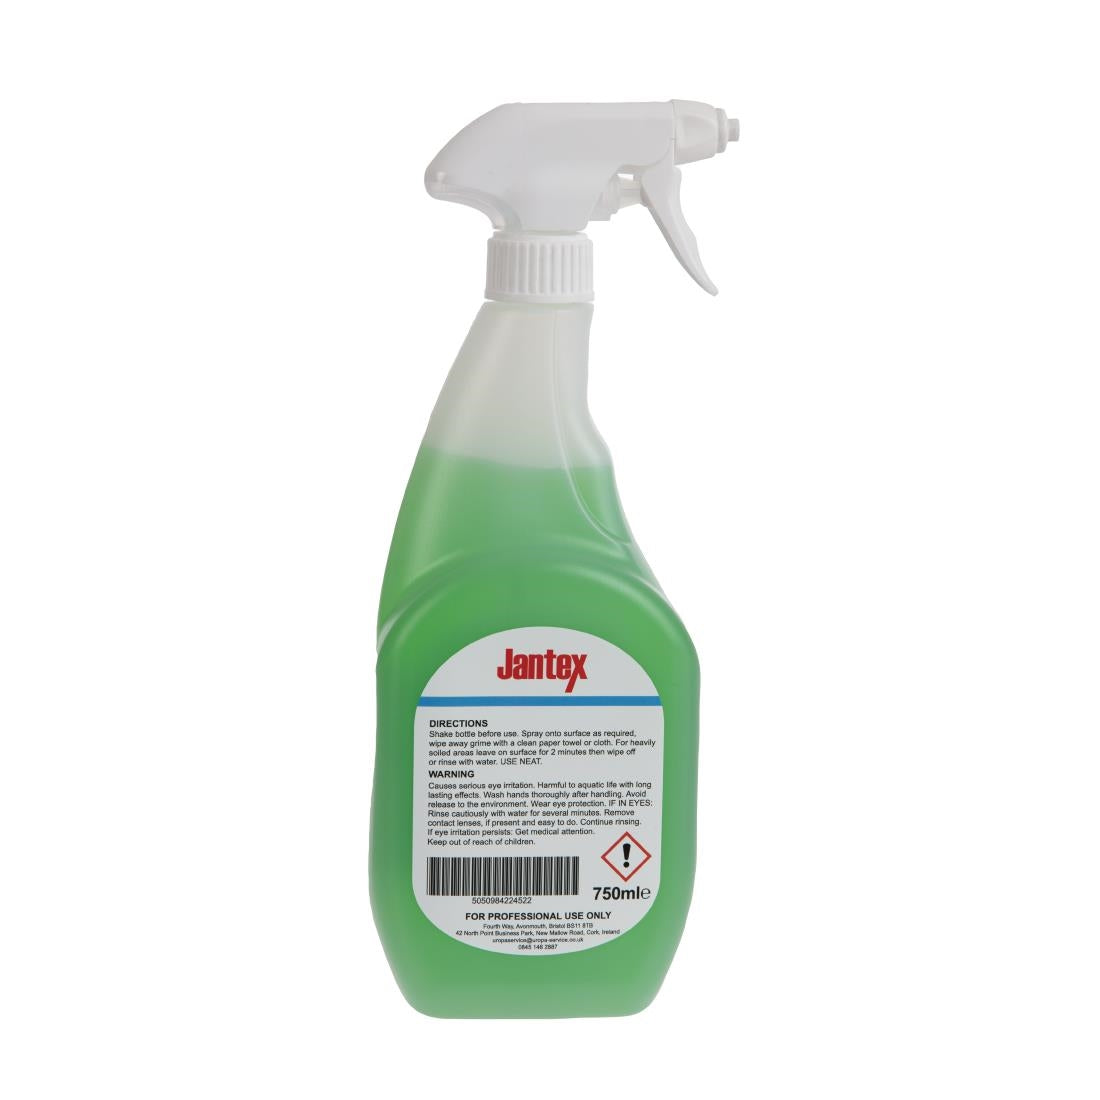 Jantex Washroom Cleaner Ready To Use 750ml JD Catering Equipment Solutions Ltd